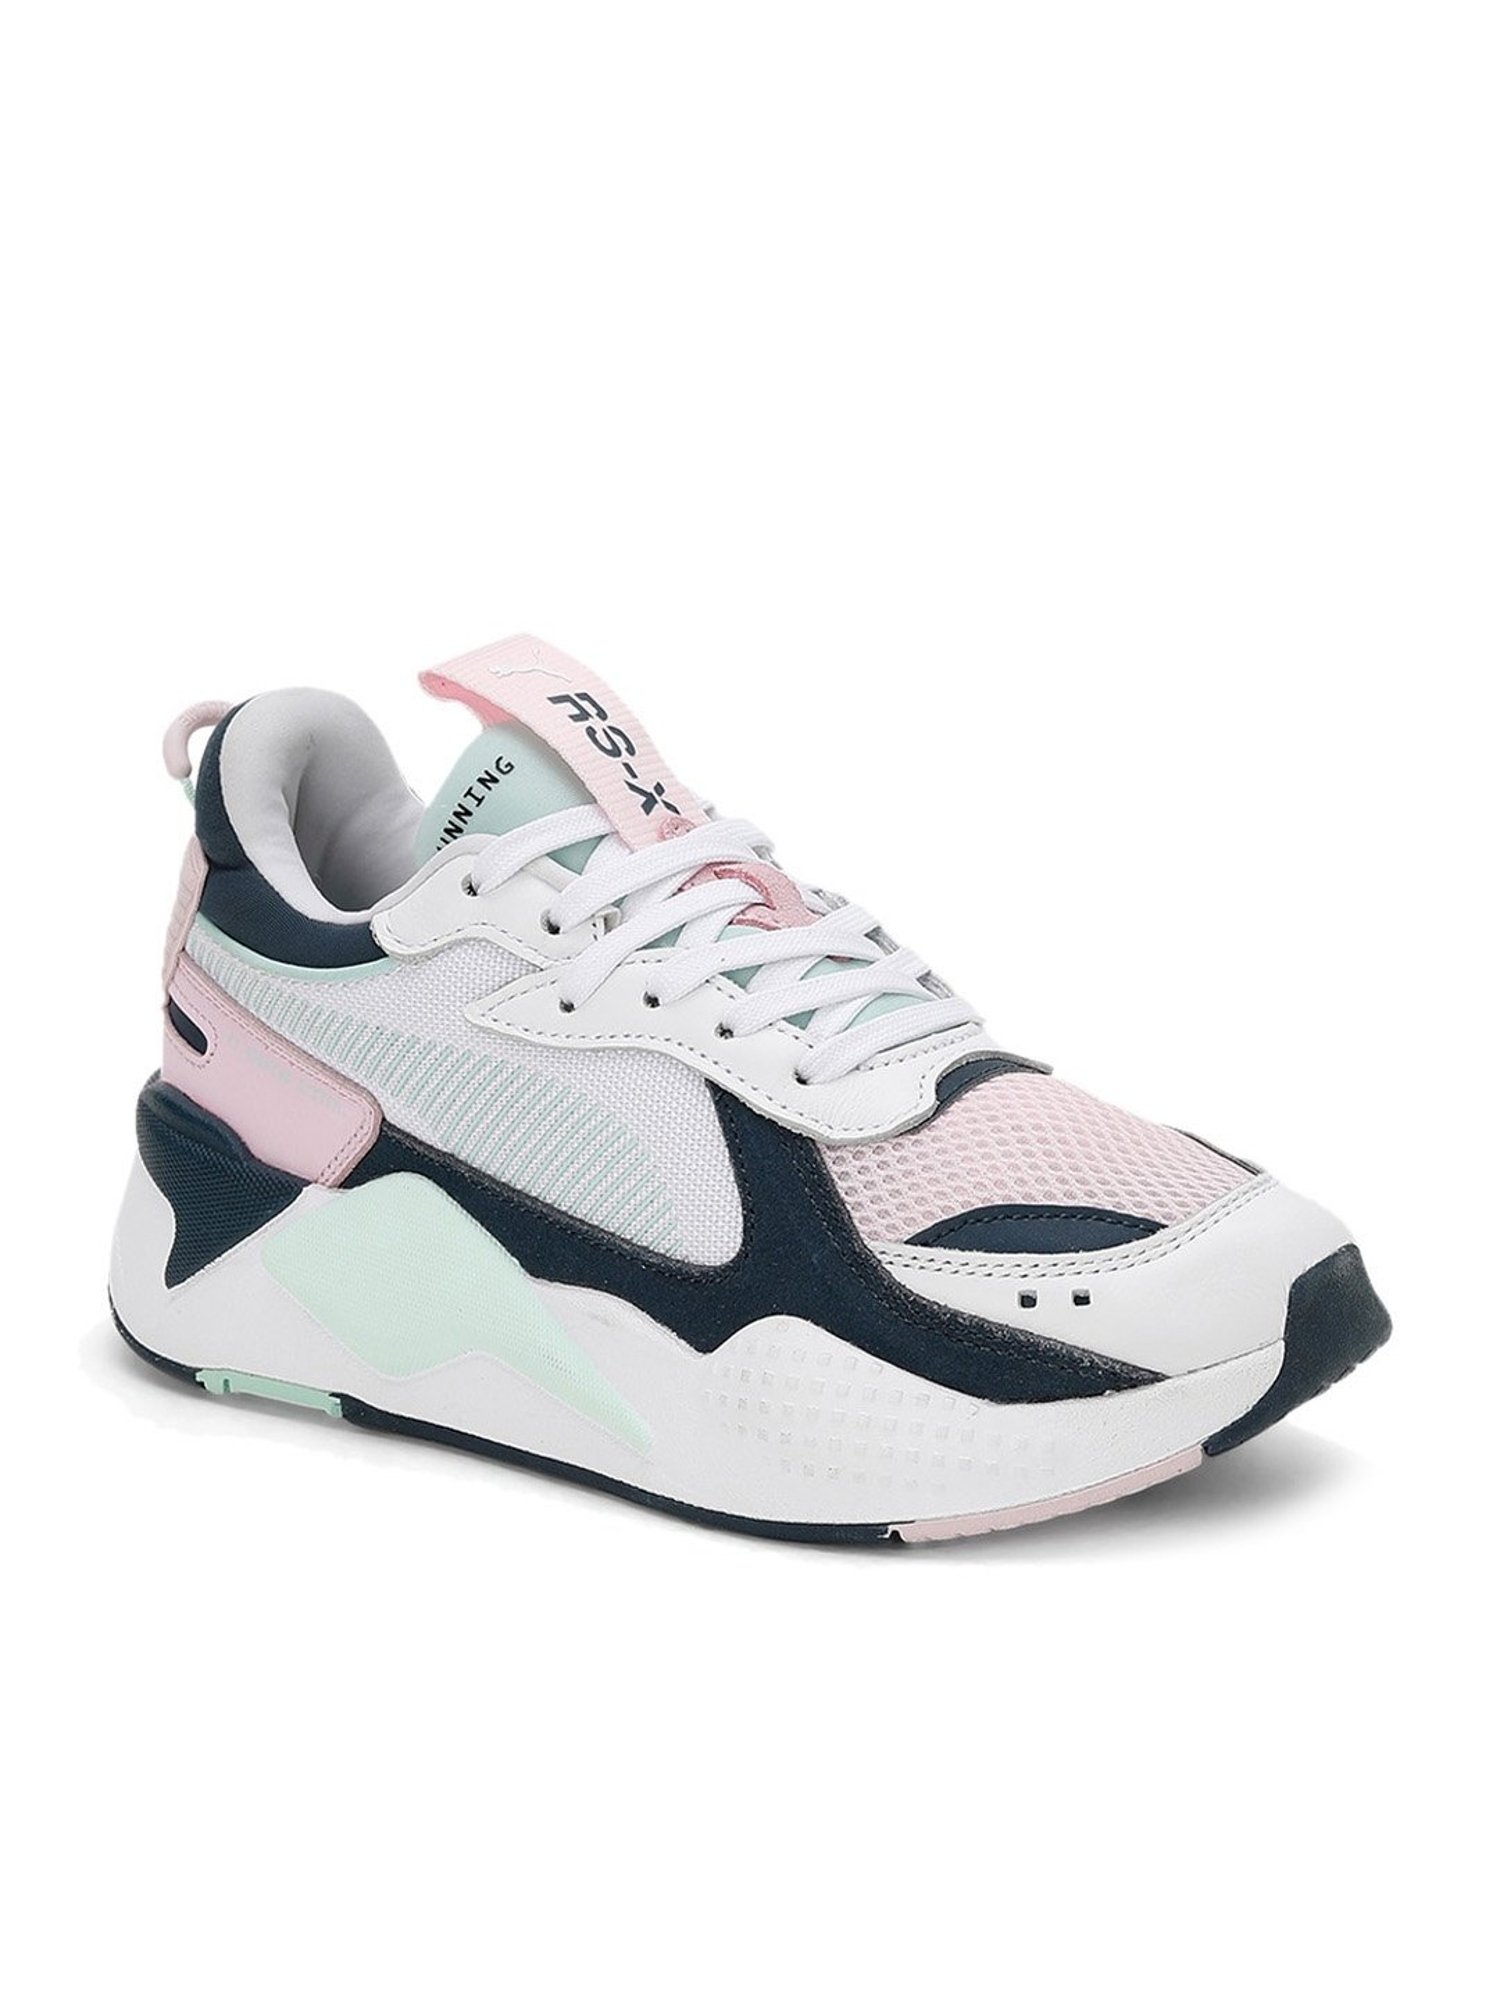 Buy Puma Rs-x Reinvention Unisex Multi Color Sneakers Online